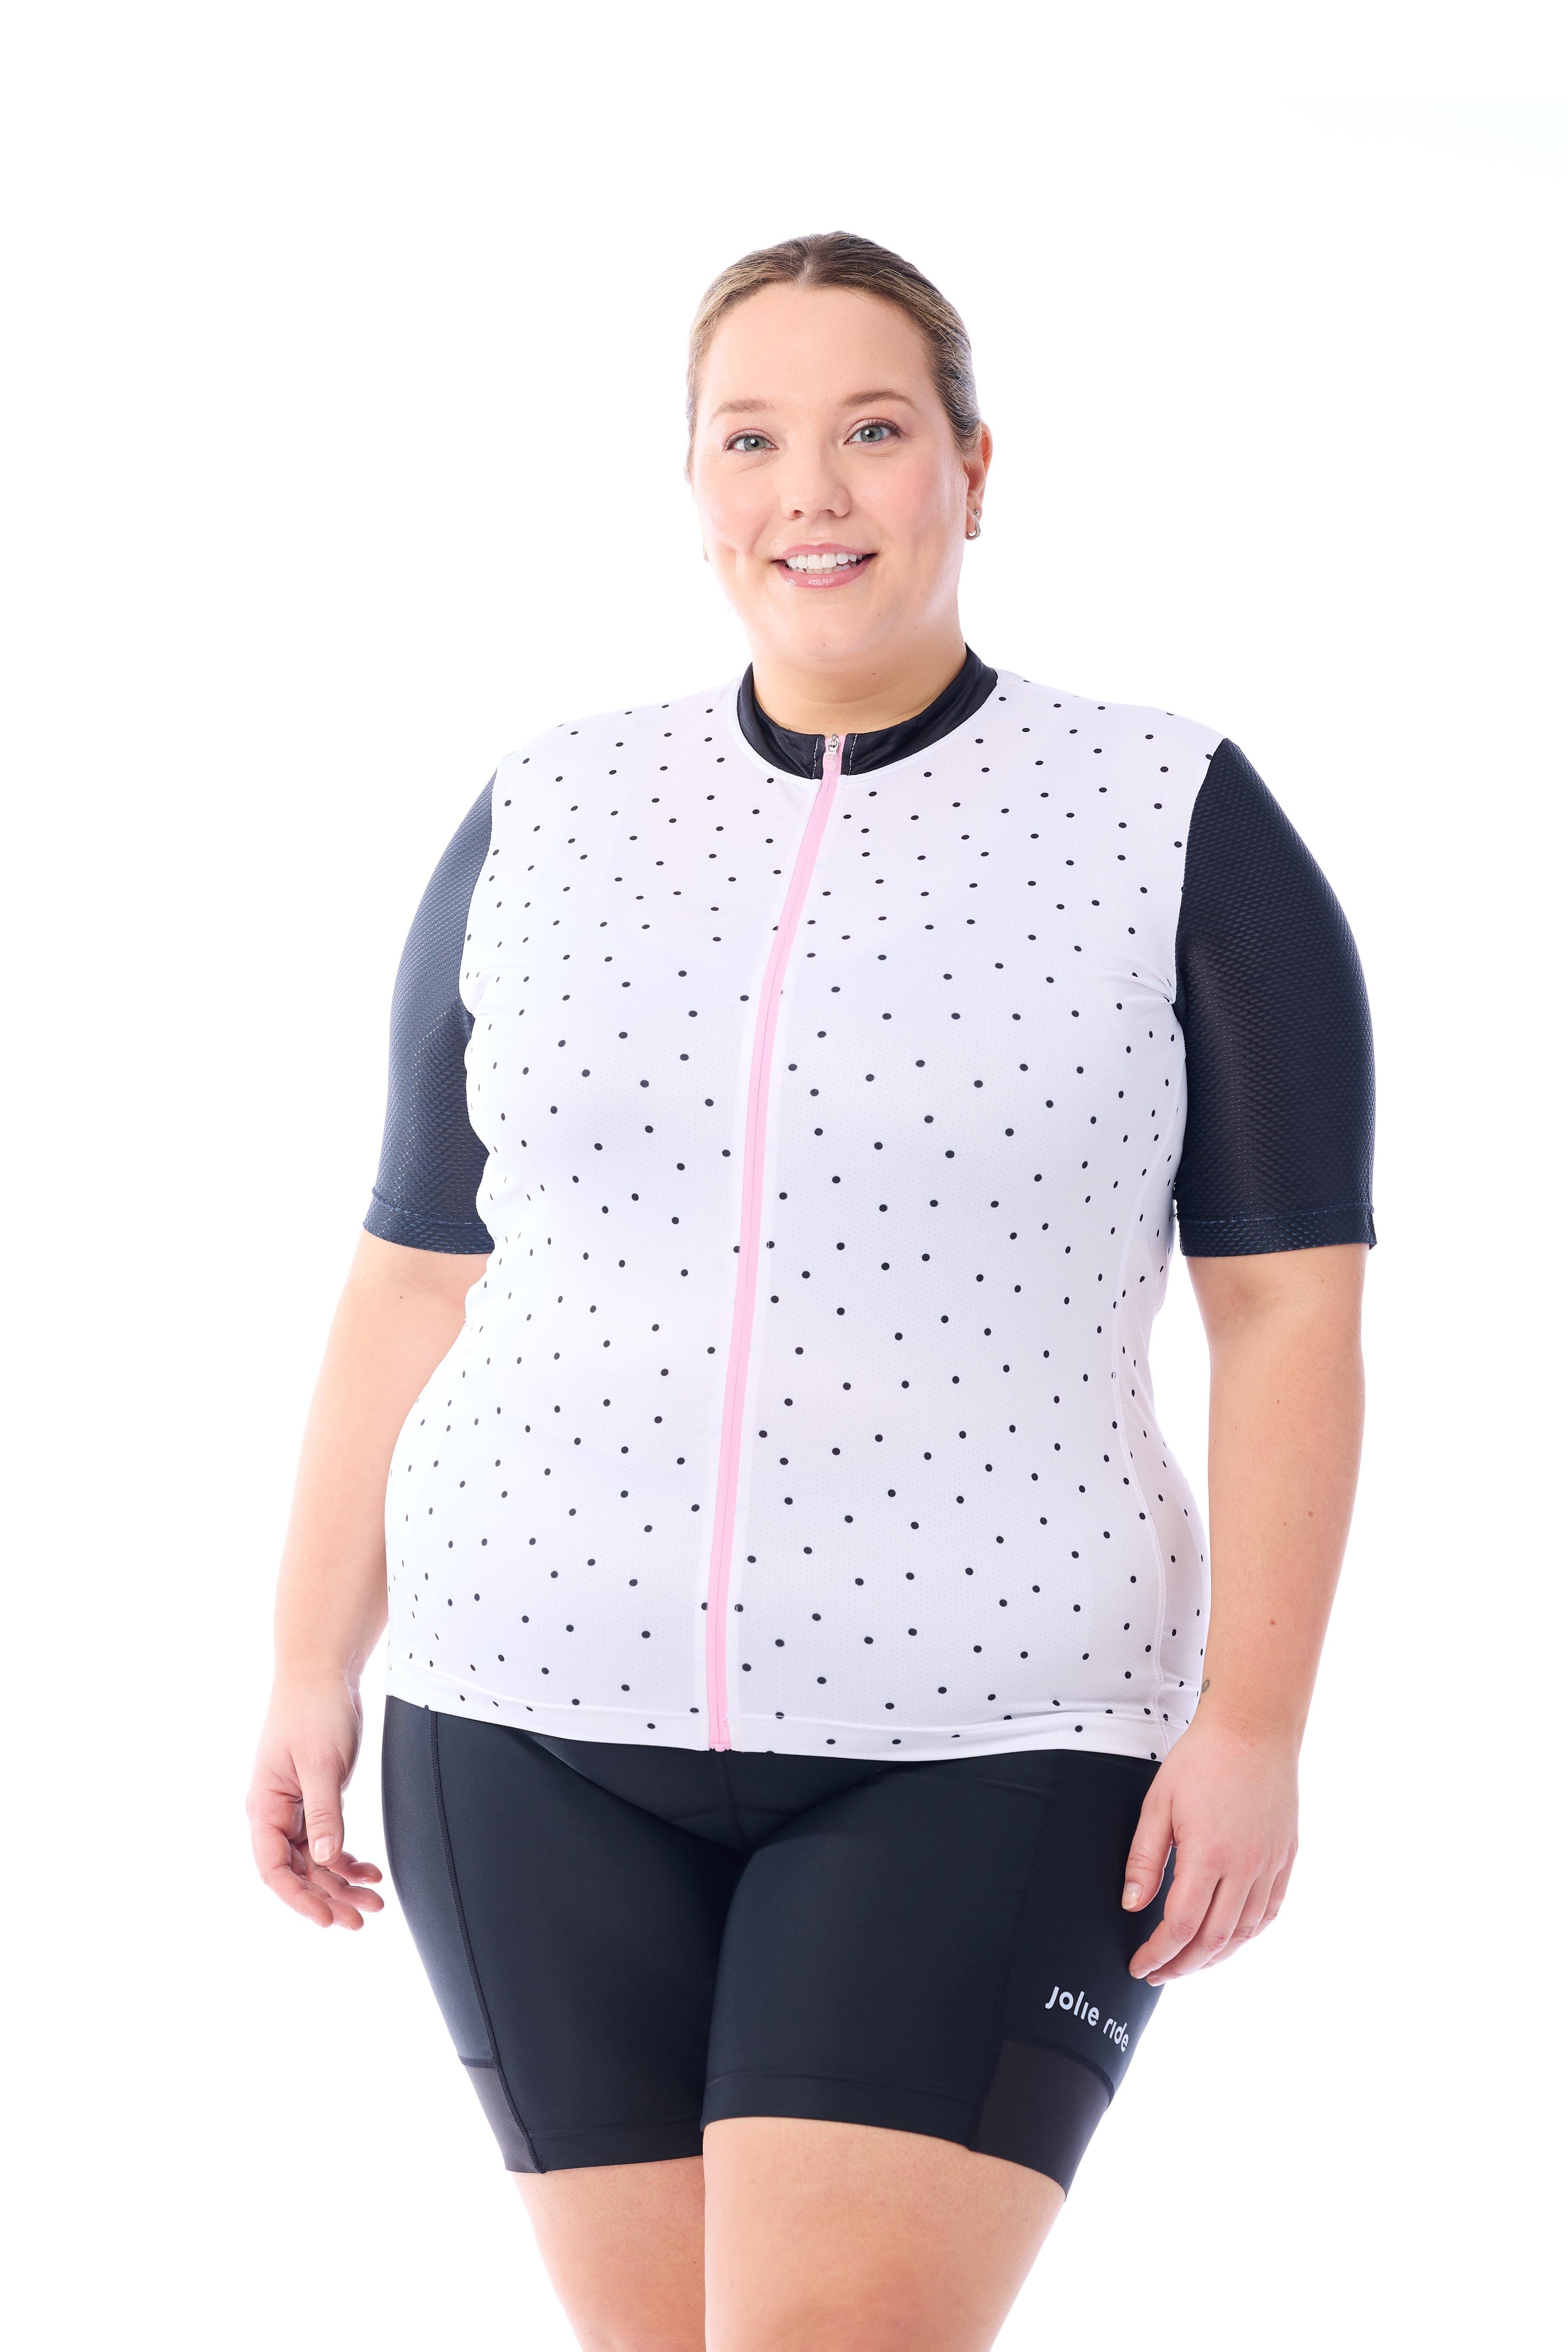 JolieRide Jersey Black Dots / 1X women's cycling jersey with UV protection, breathability, and storage